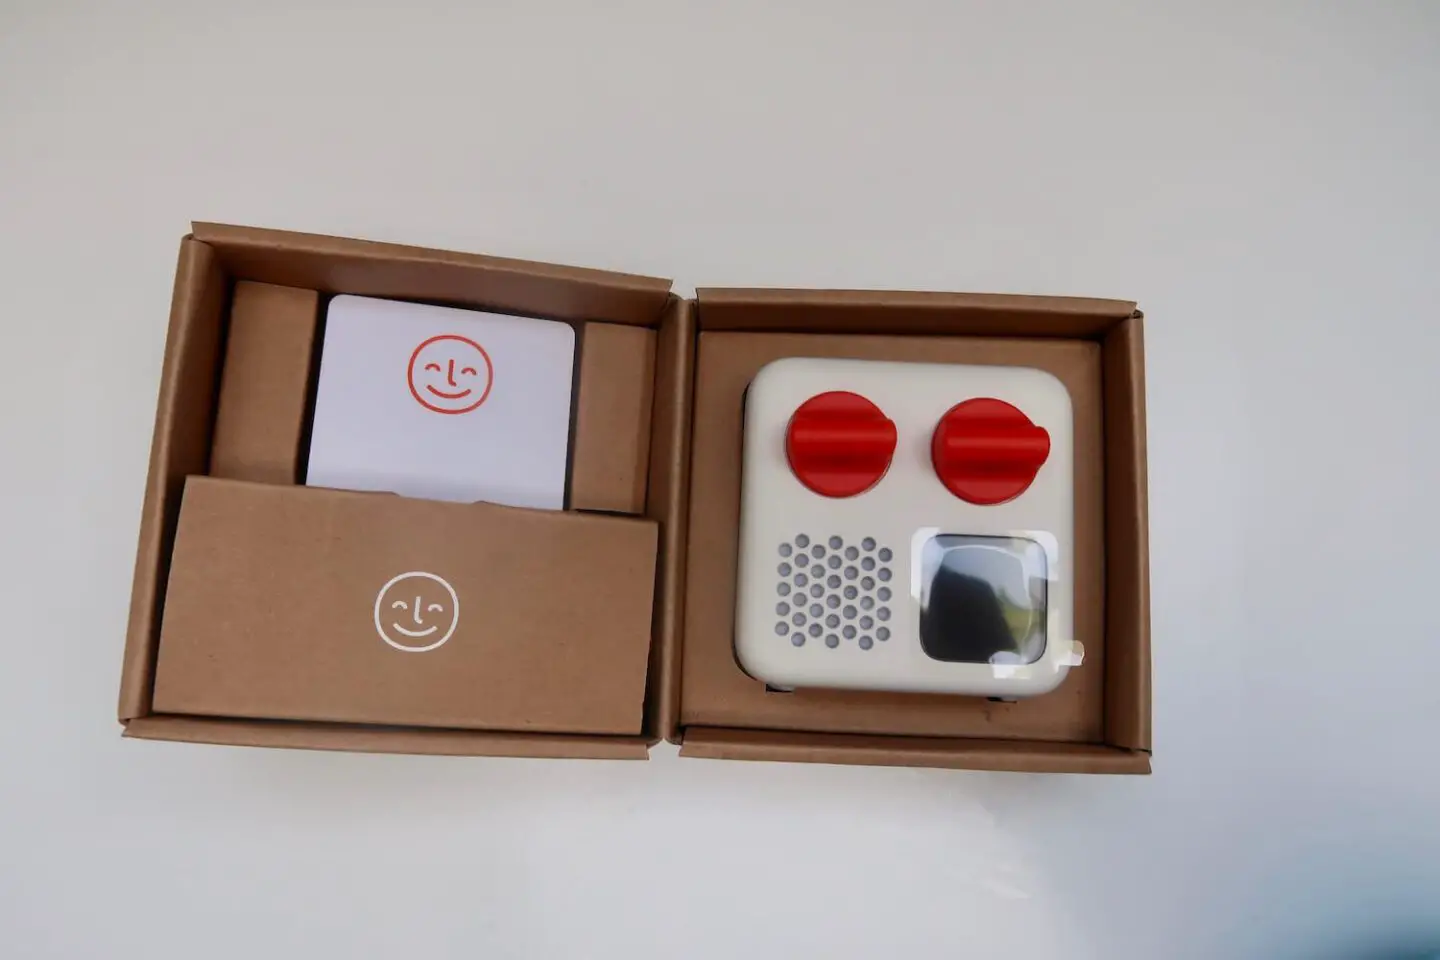 The Yoto mini box opened and showing the player and a card